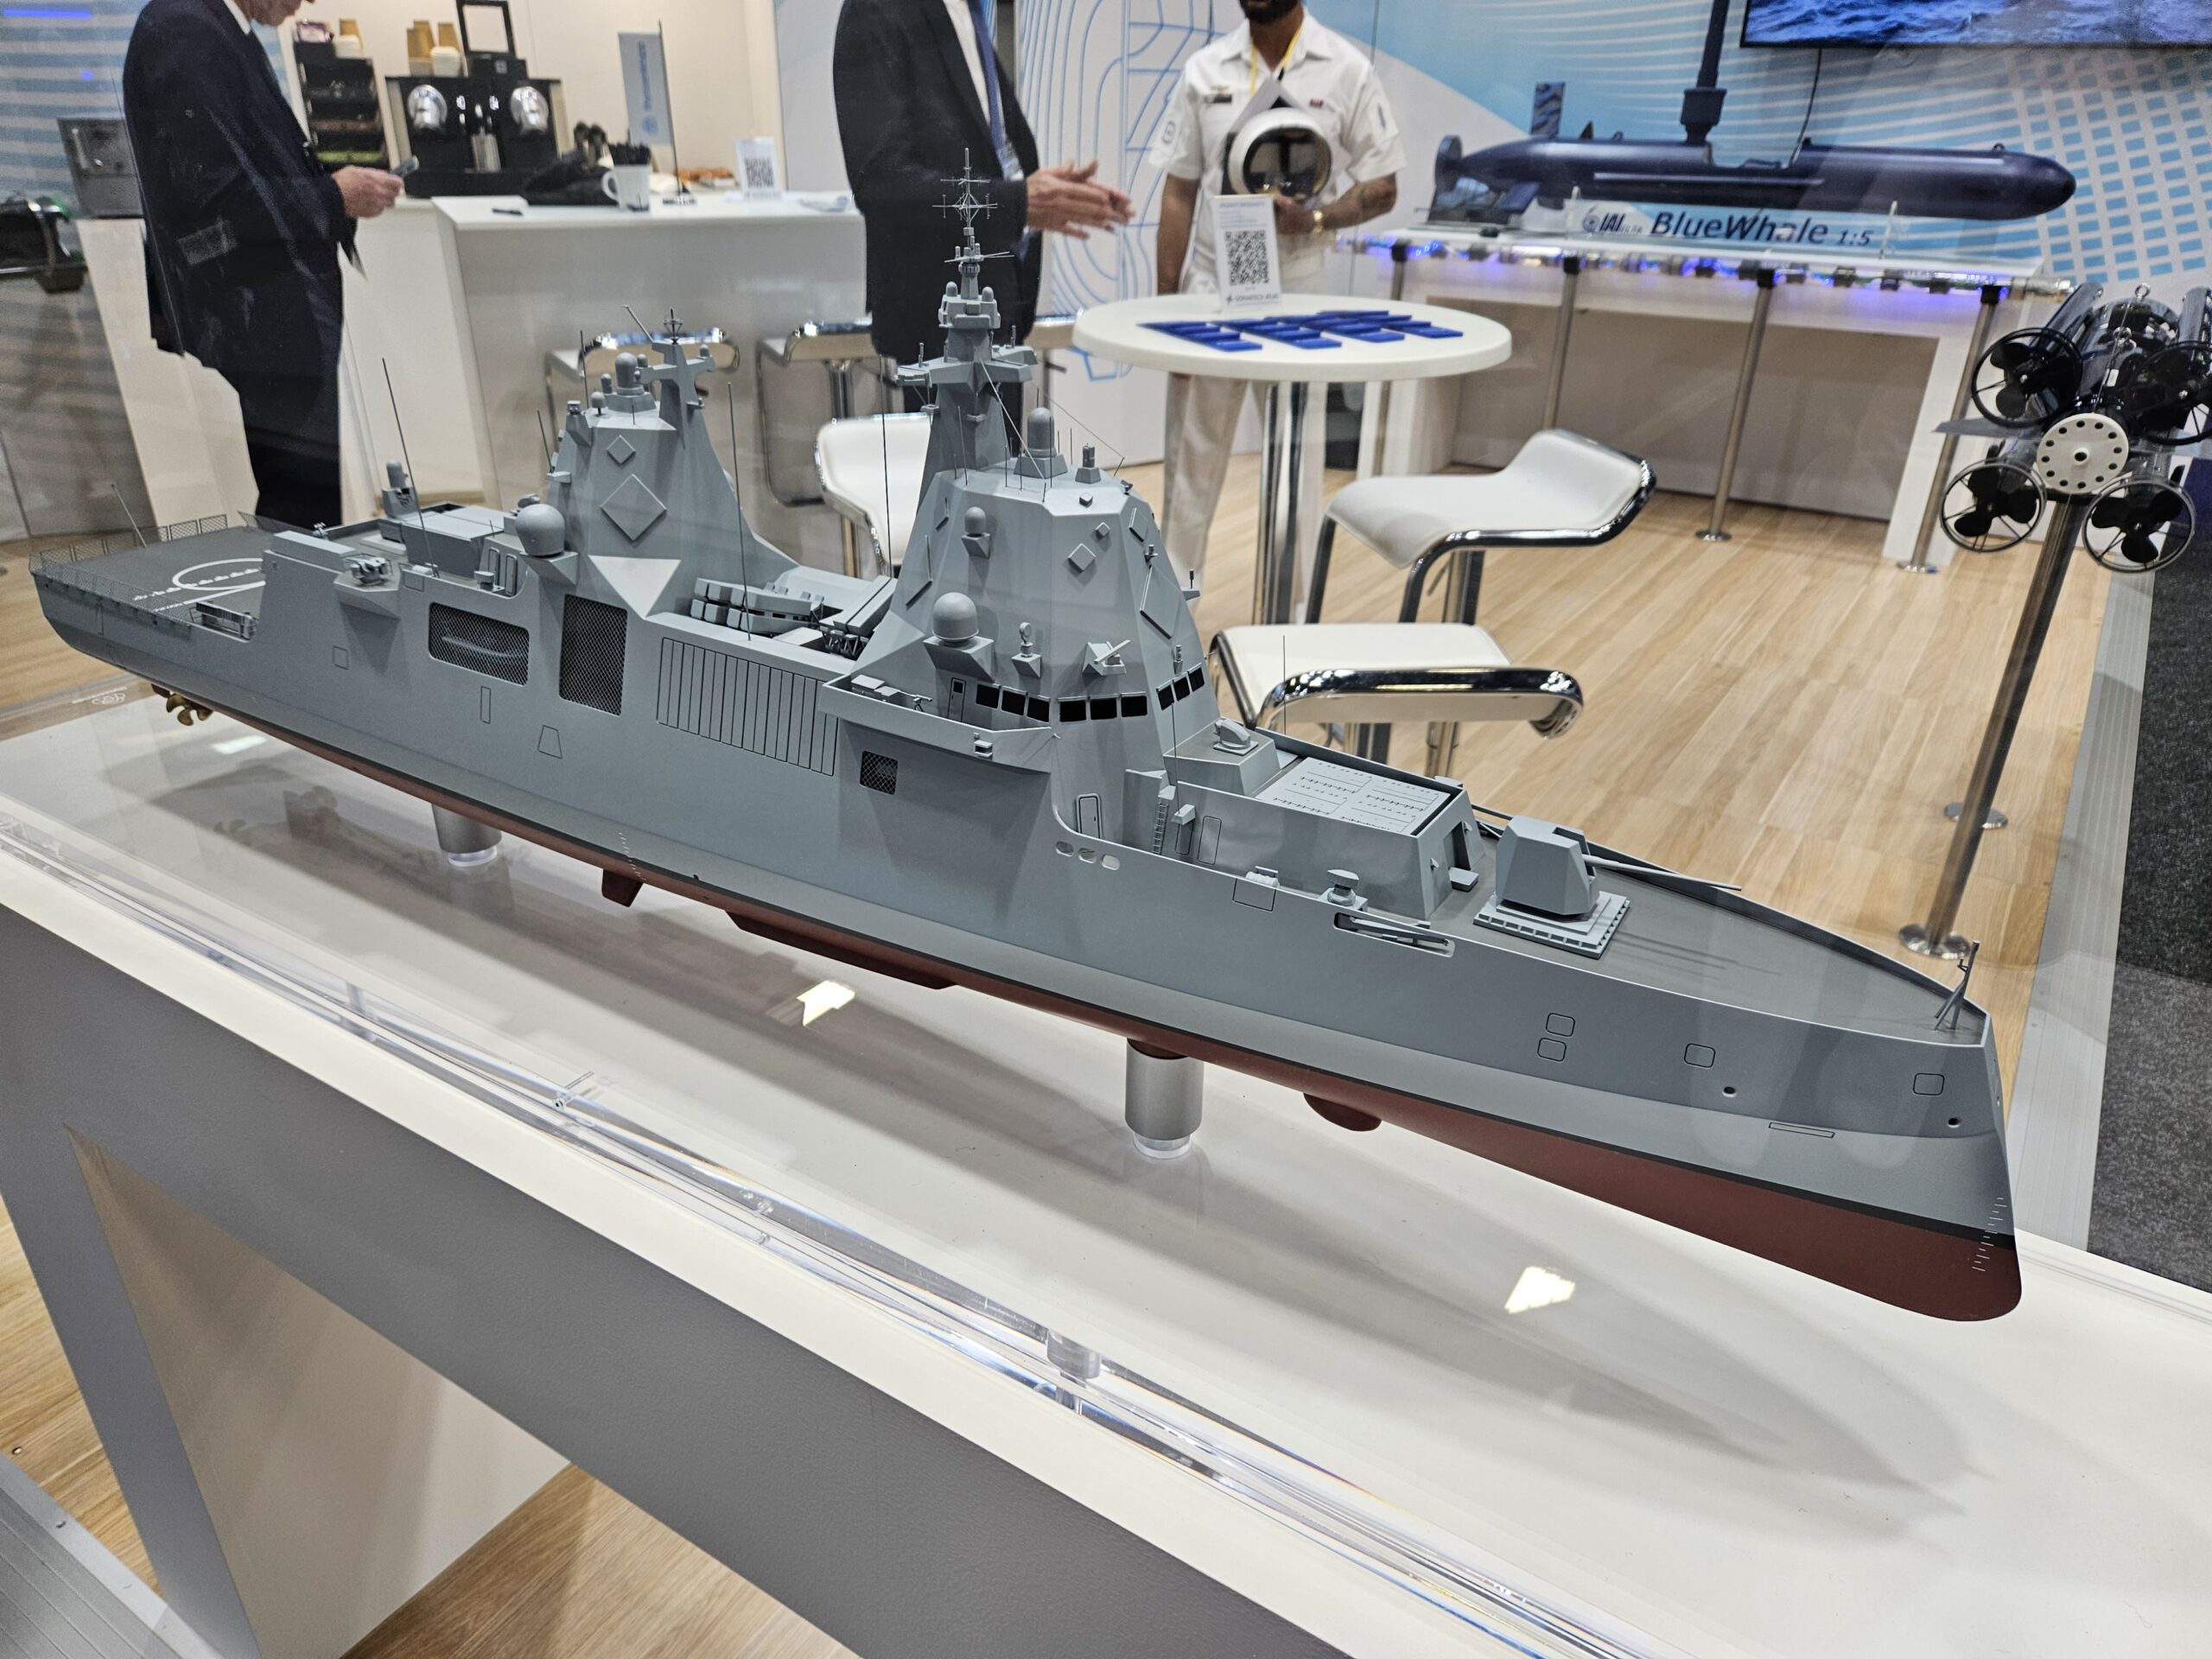 MEKO A210, the German frigate proposal is ready for everything!